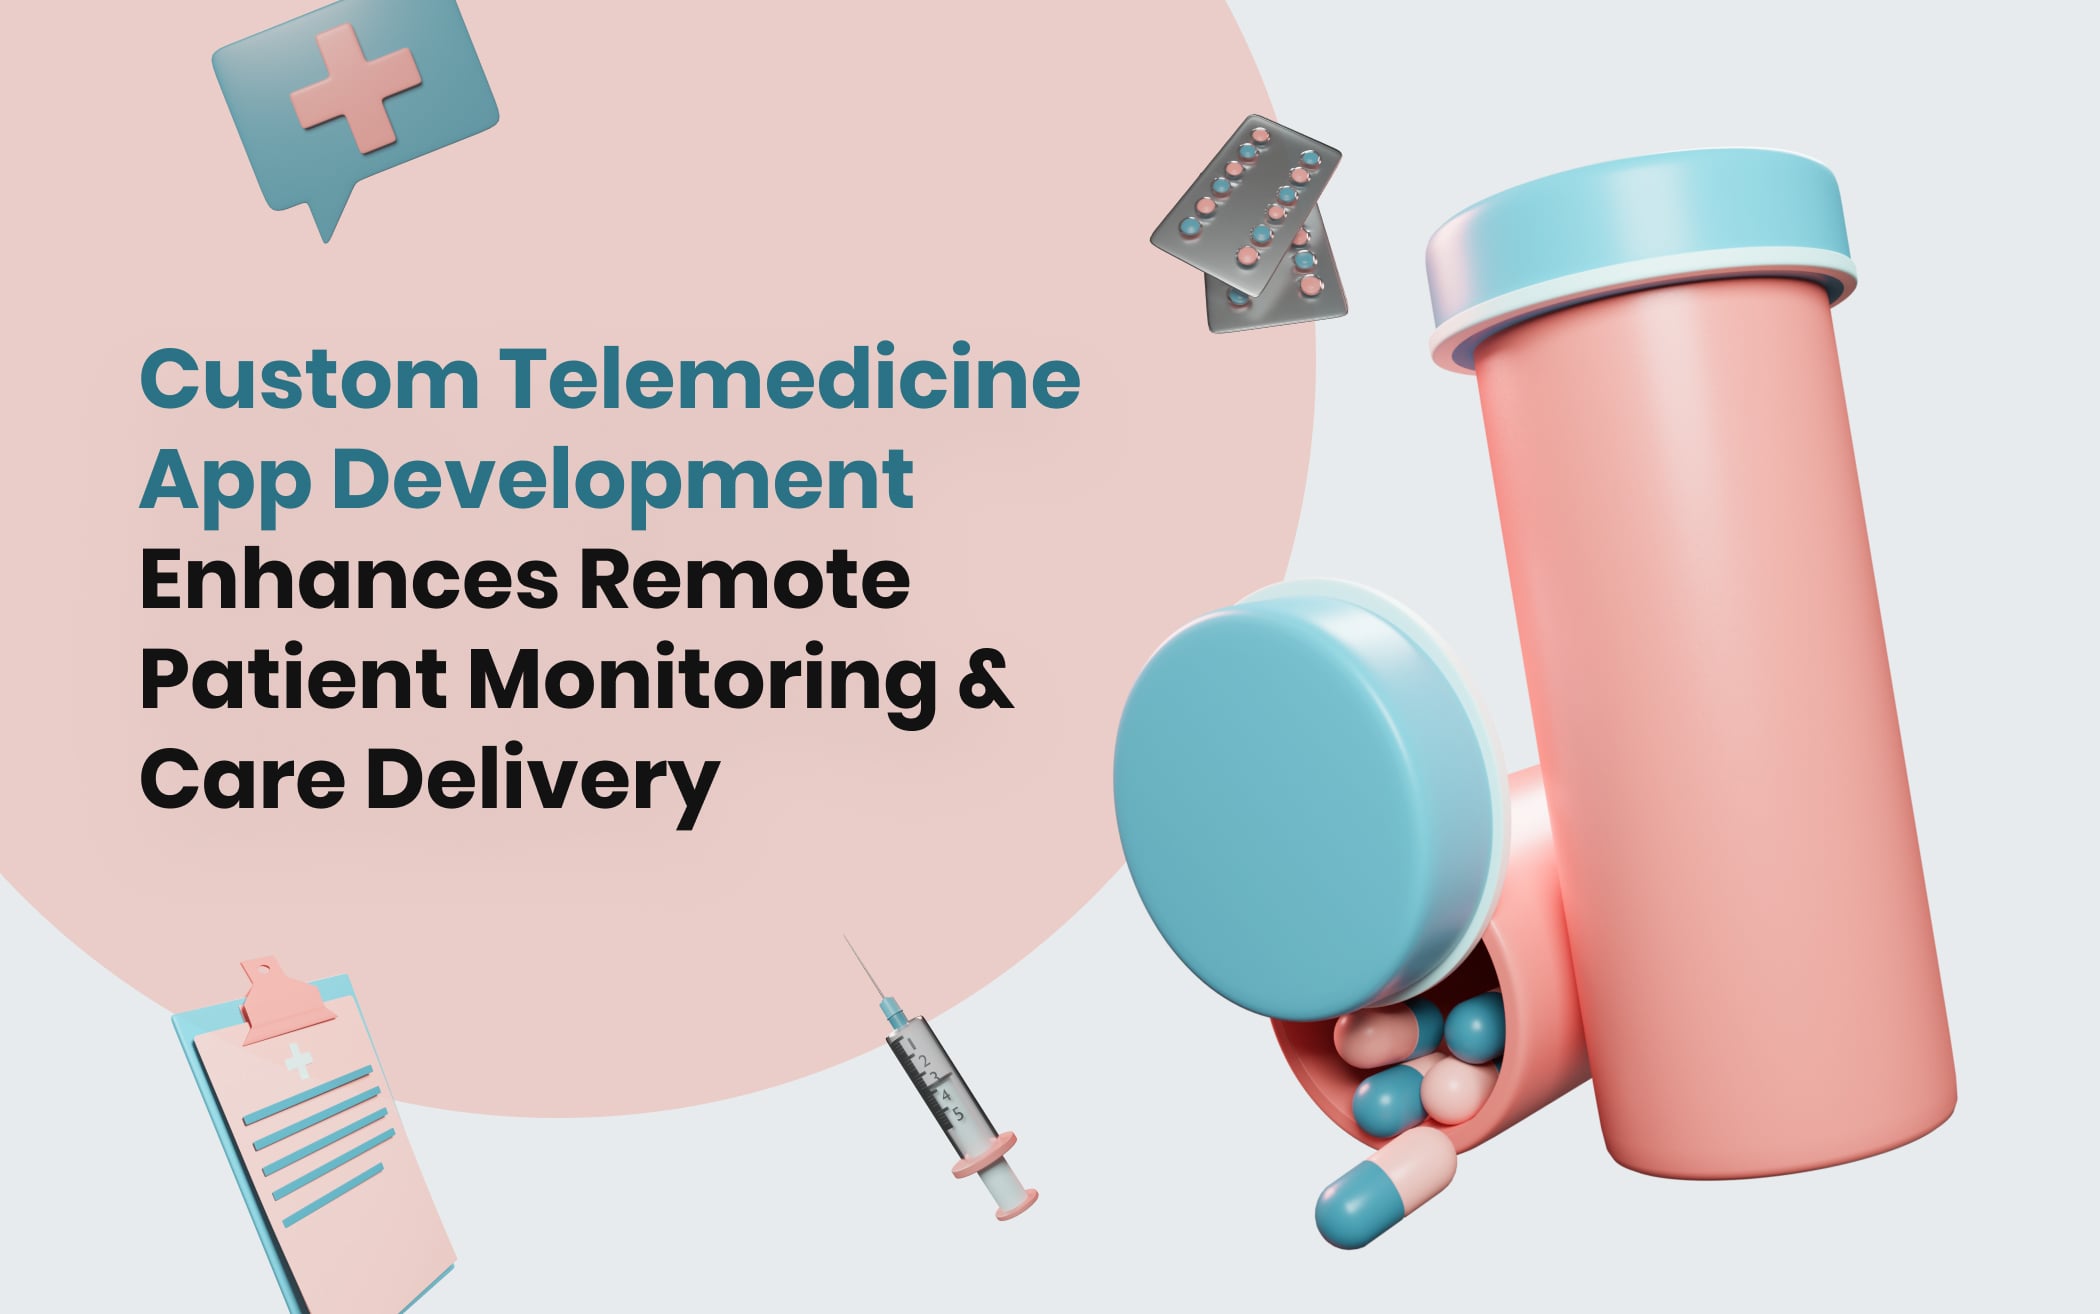 How Custom Telemedicine App Development Enhances Remote Patient Monitoring and Care Delivery